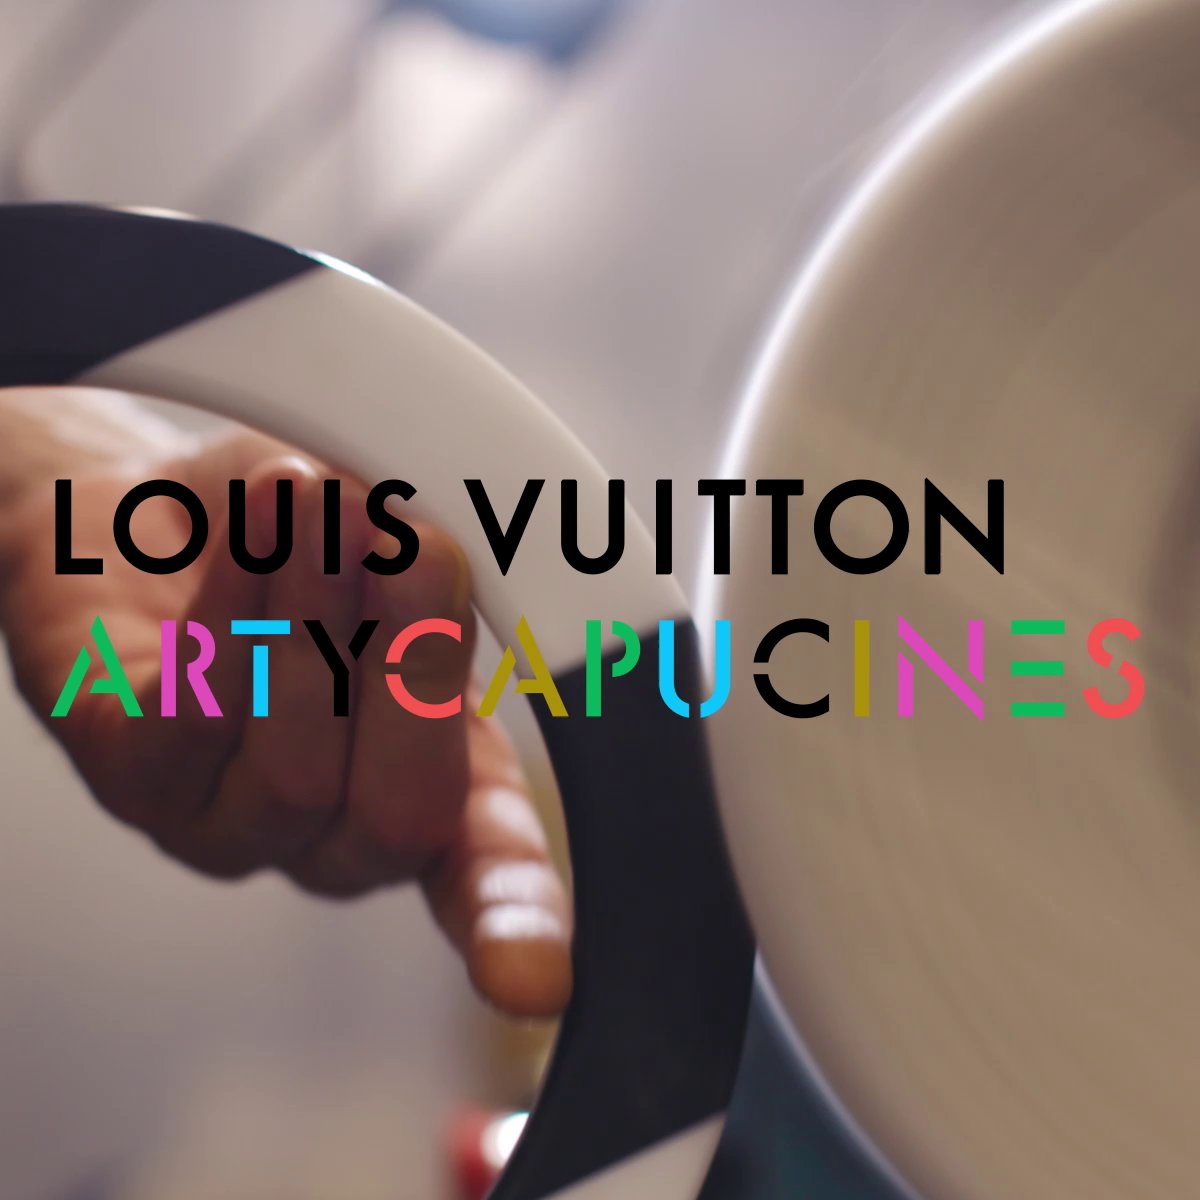 Louis Vuitton on X: #LVArtycapucines, the fourth edition. This